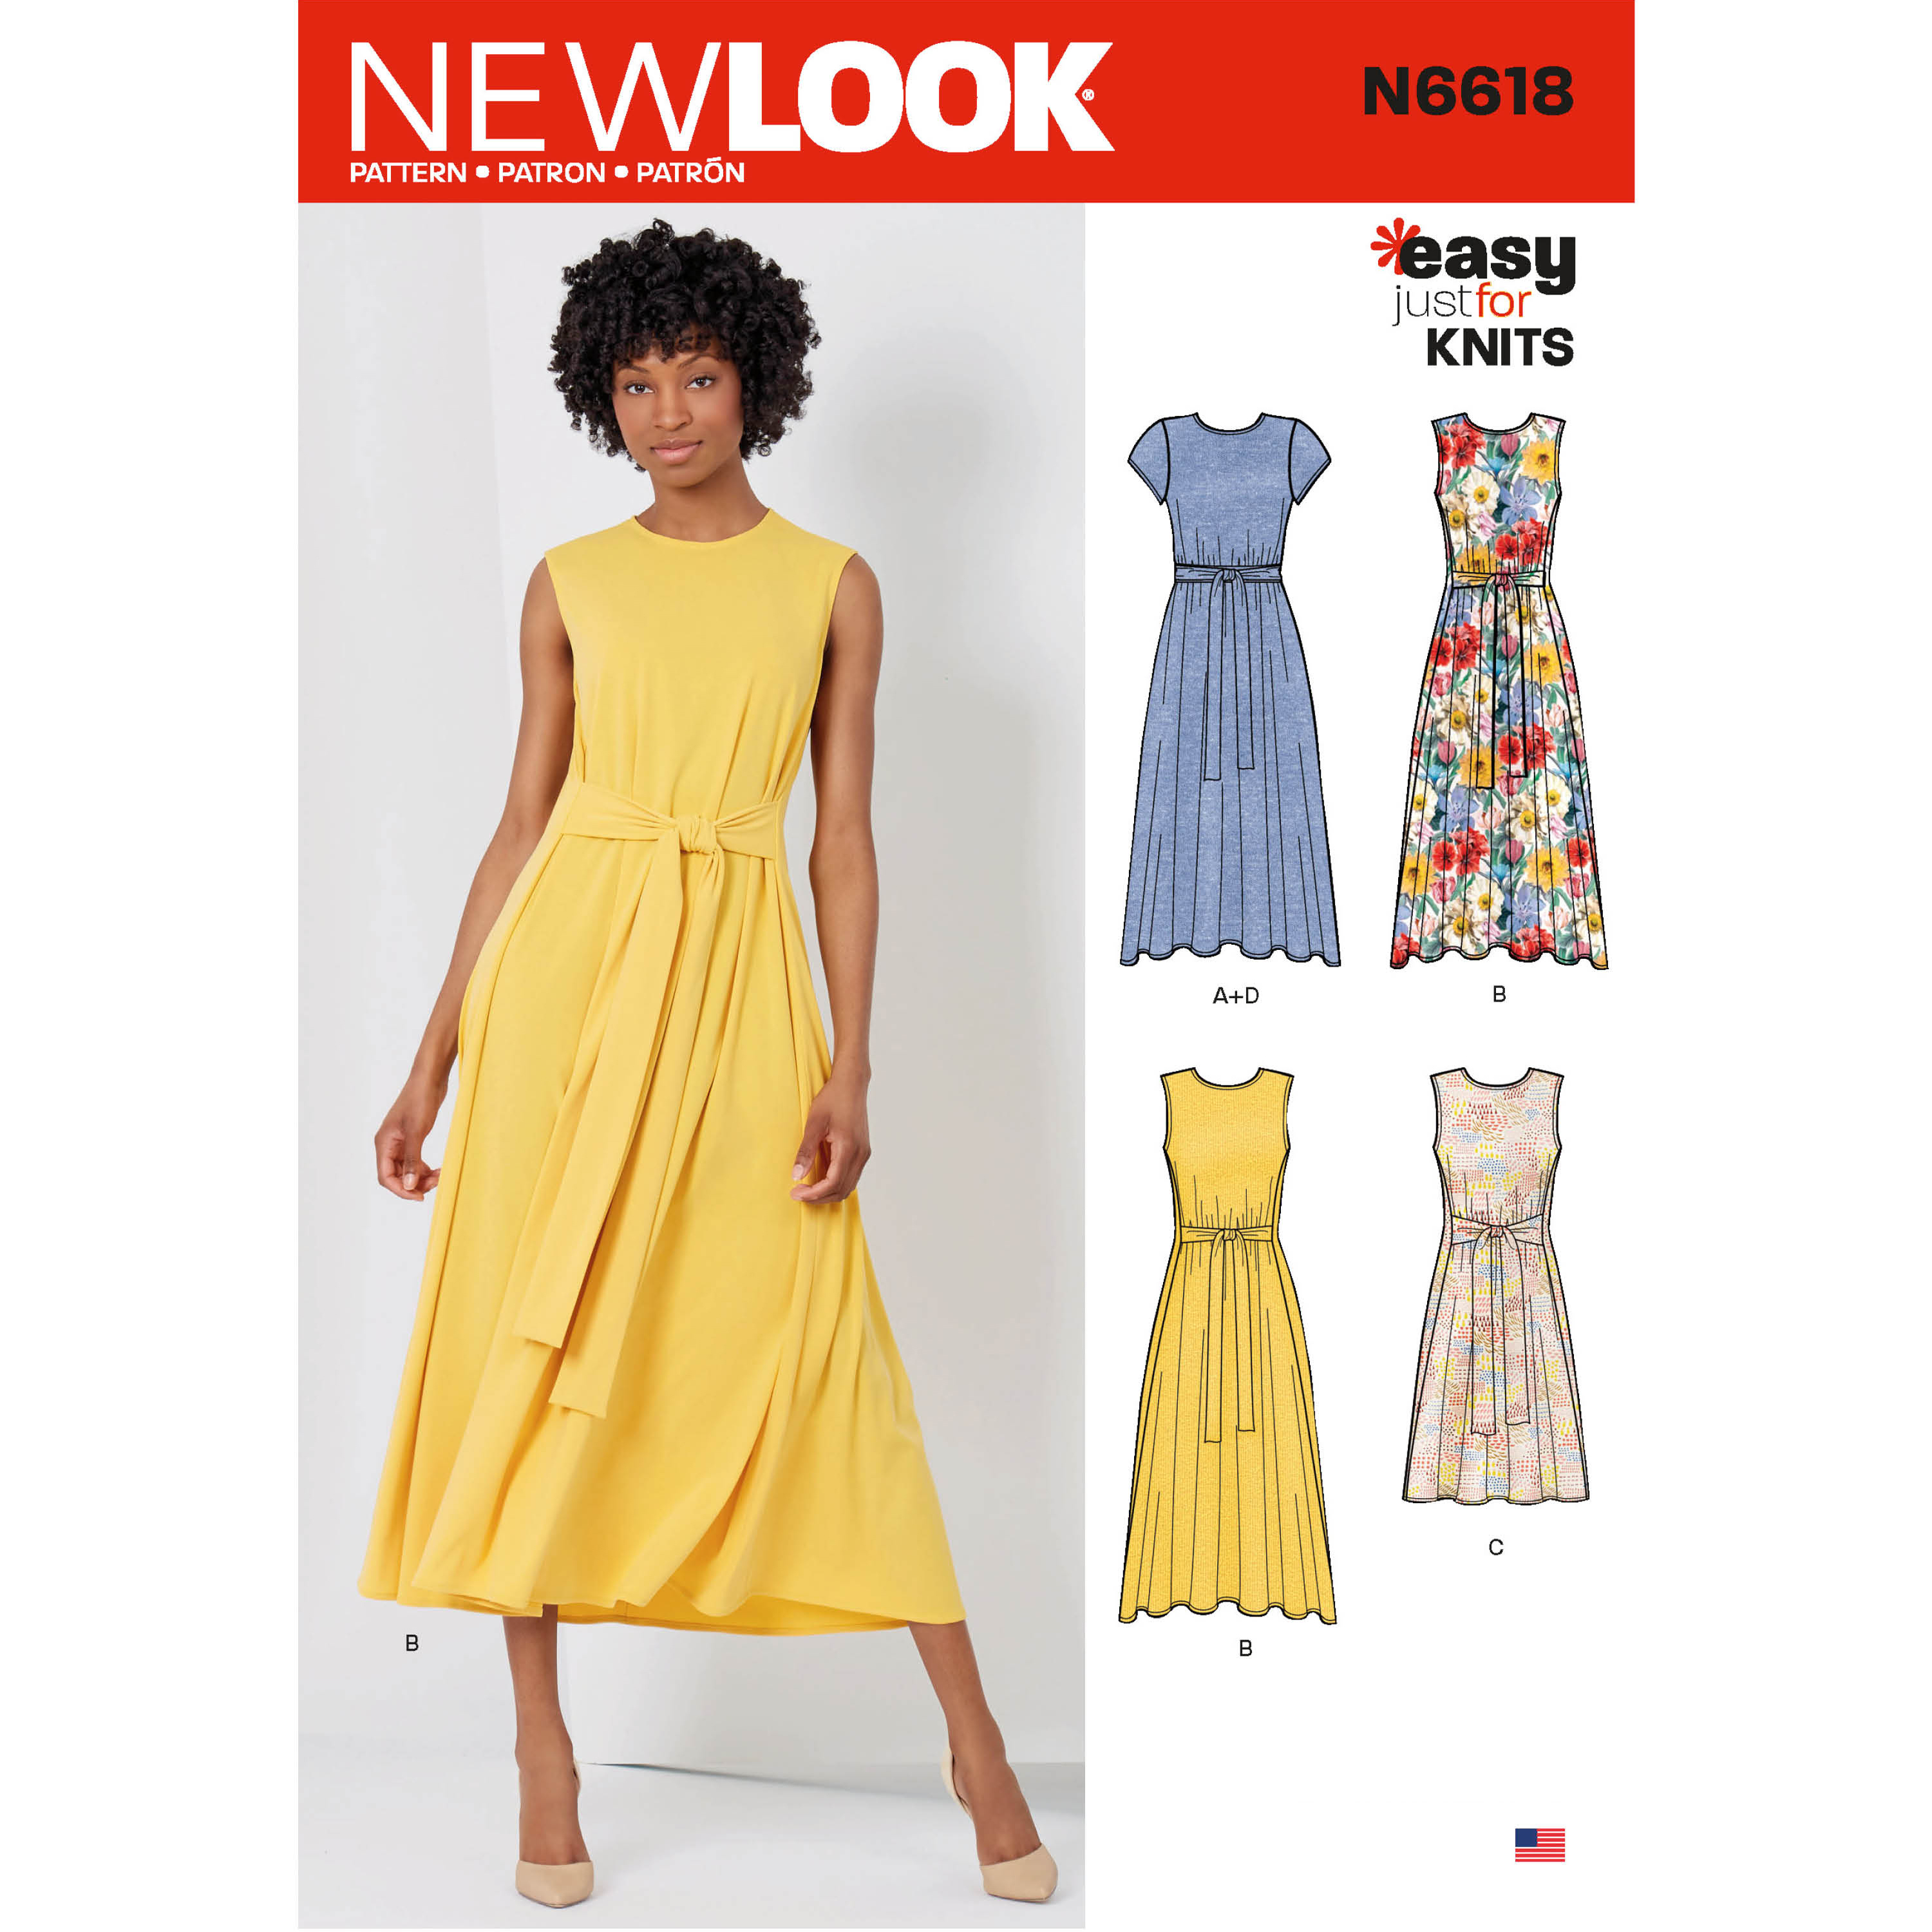 Simple Knit Dress Pattern New Look Sewing Pattern N6618 Misses Dresses In Two Lengths